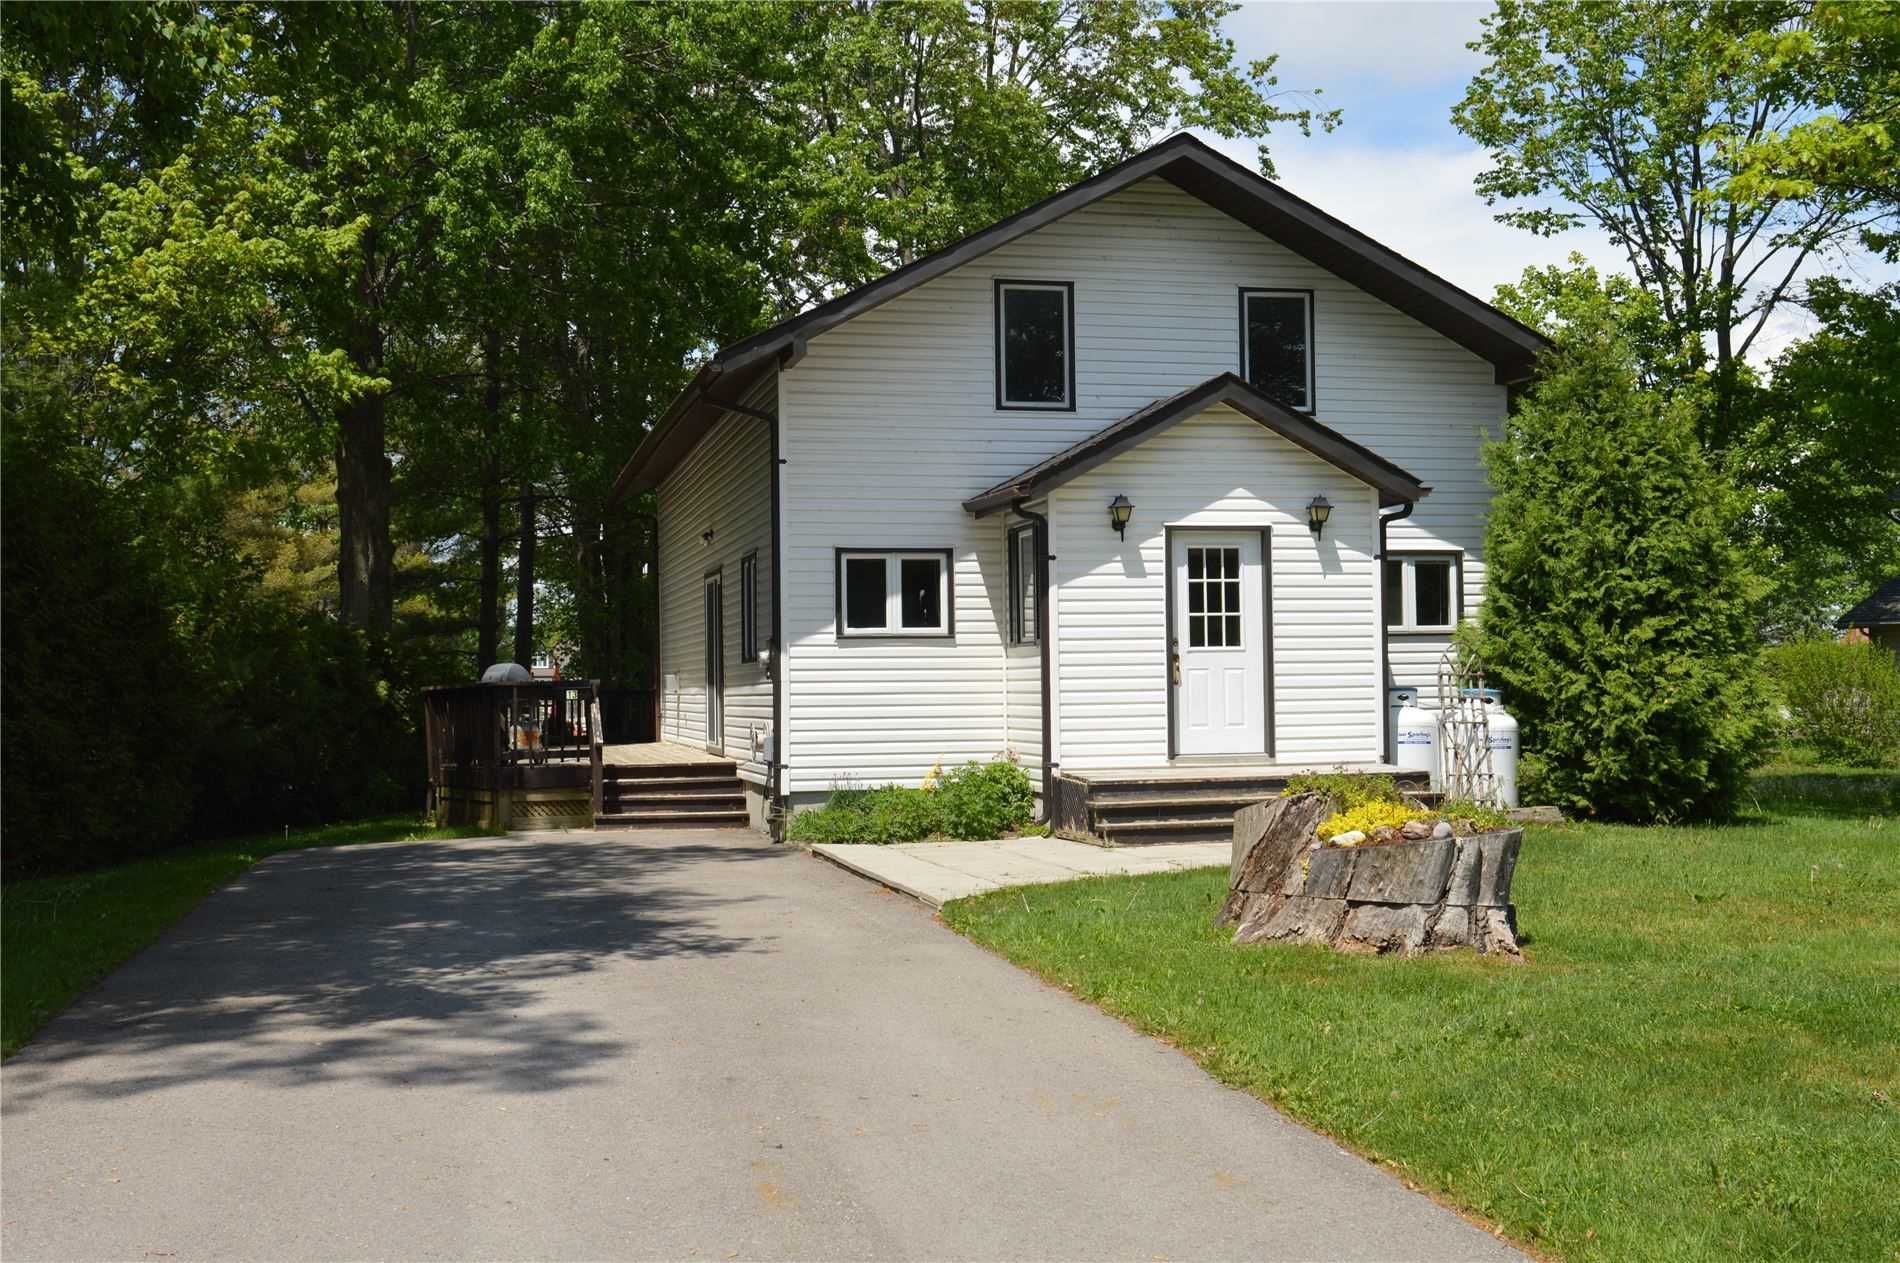 Main Photo: 13 Old Indian Trail in Ramara: Brechin House (2-Storey) for lease : MLS®# S4563298